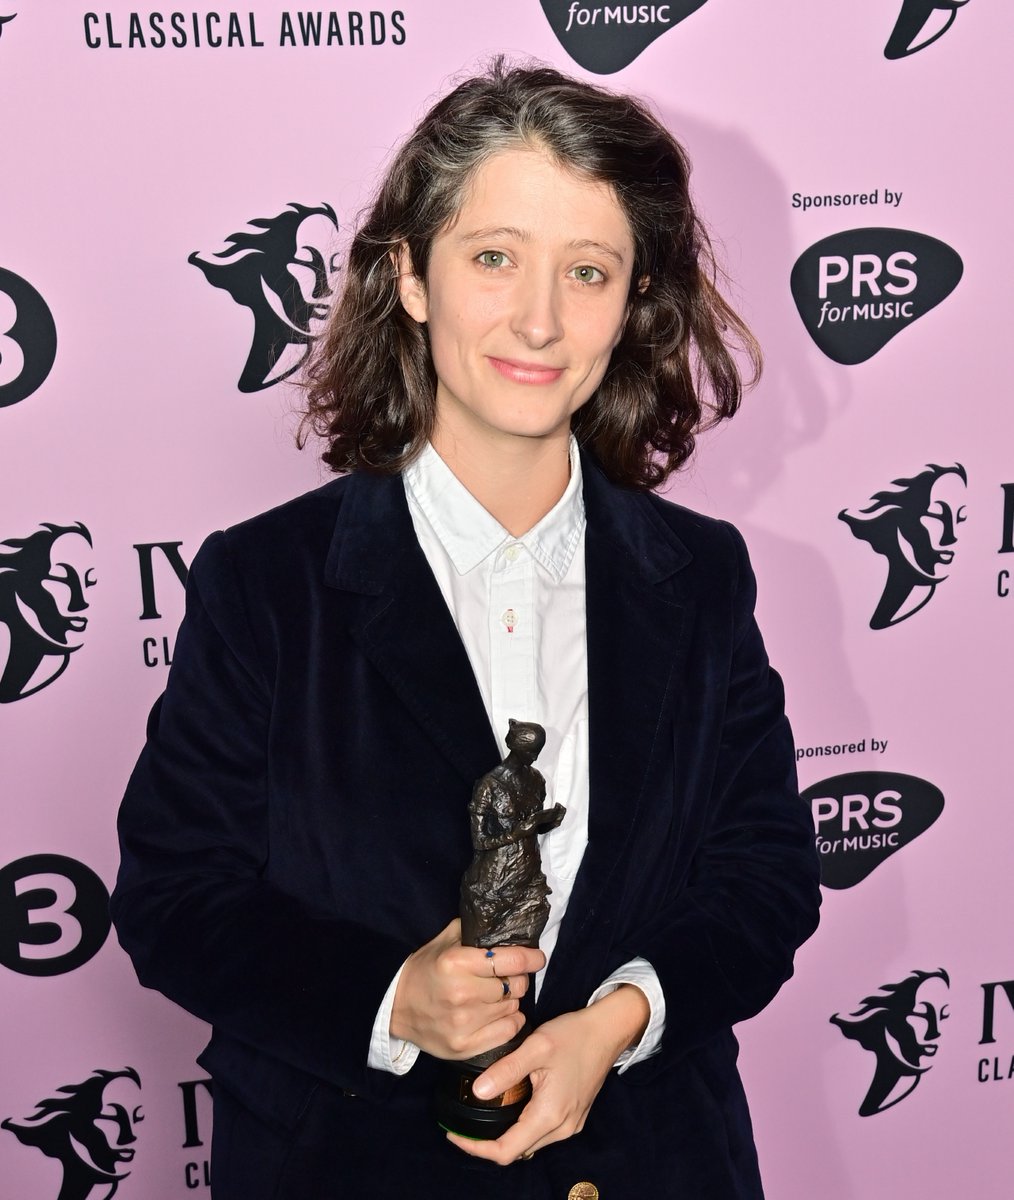 Josephine Stephenson awarded #TheIvorsClassicalAwards best small chamber composition for her work 'Comme l’espoir/you might all disappear' Congratulations @jsphnstphnsn! @PRSforMusic @IvorsAcademy